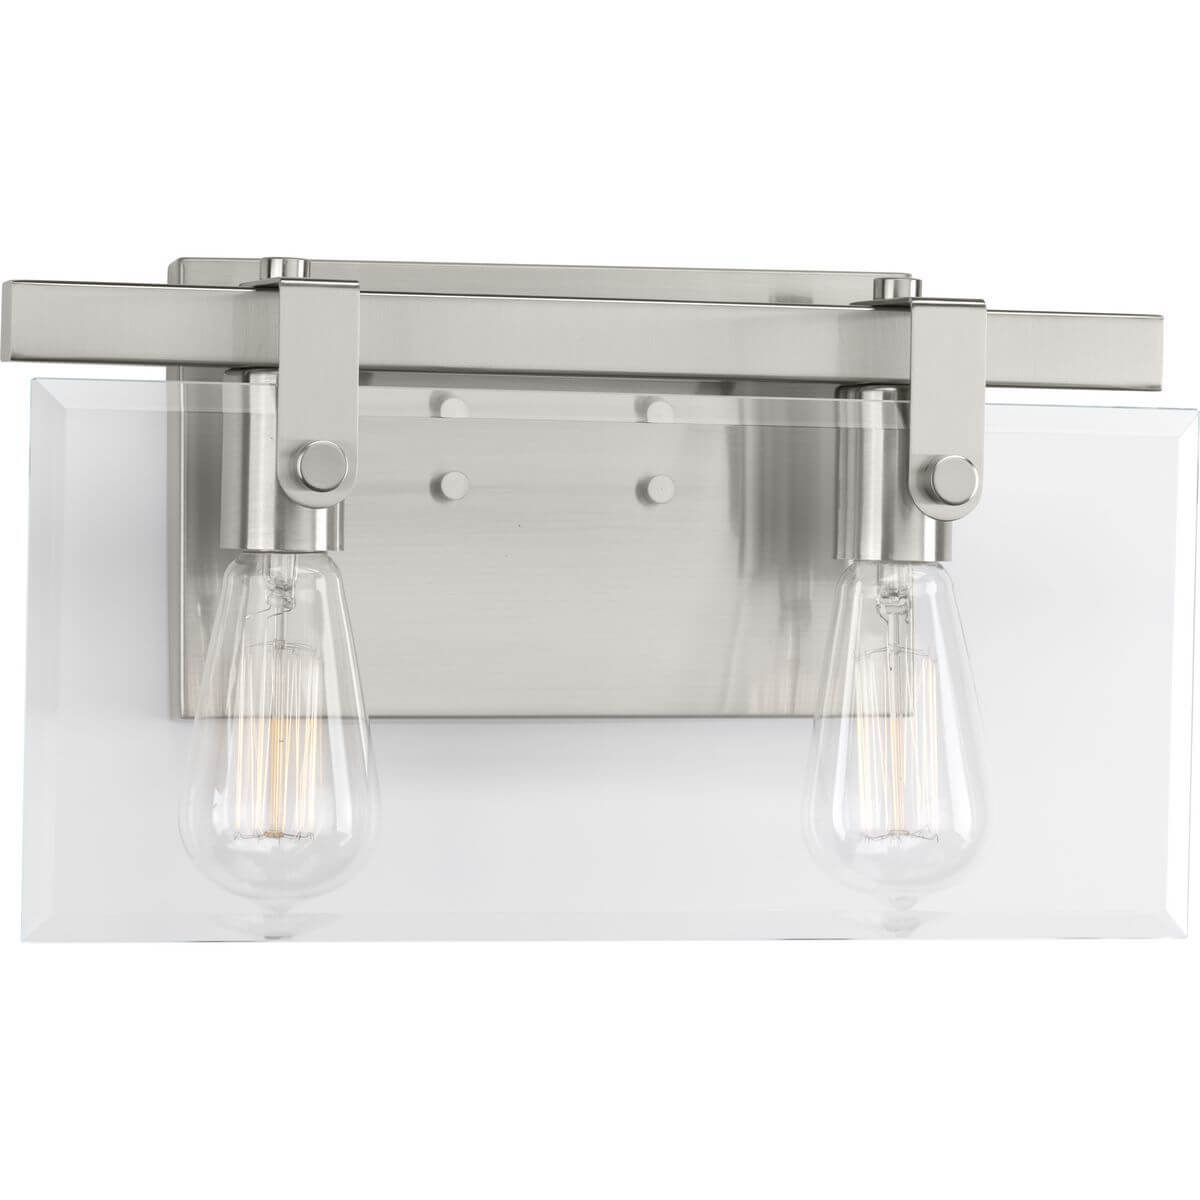 Progress Lighting Glayse 2 Light 15 inch Bath Vanity Light in Brushed Nickel with Clear Glass P300106-009